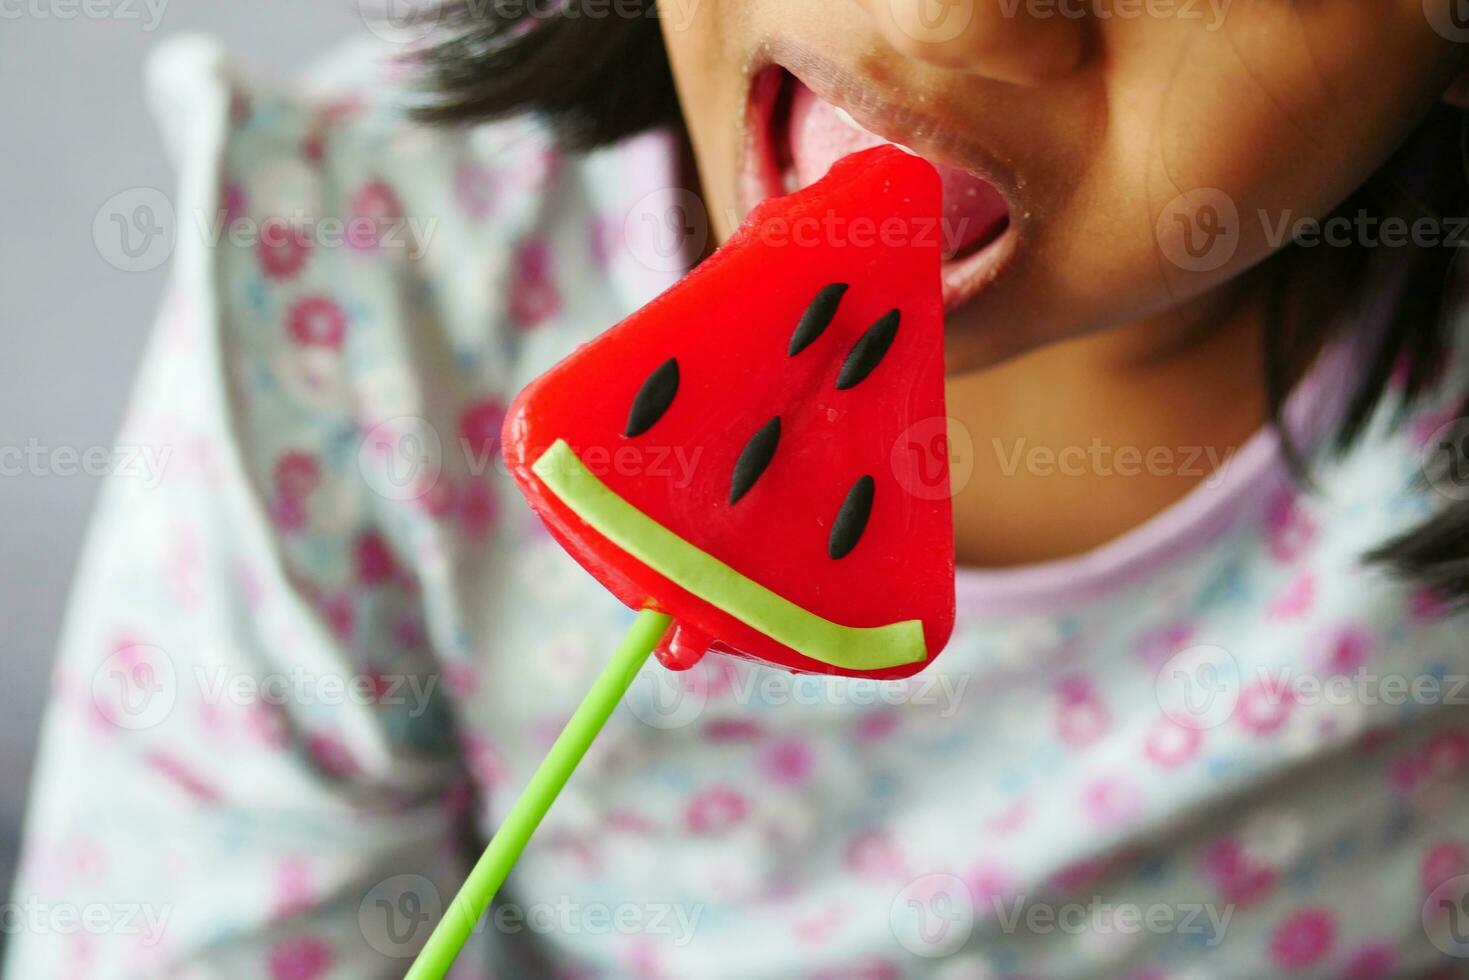 child is licking colorful candy on stick, photo